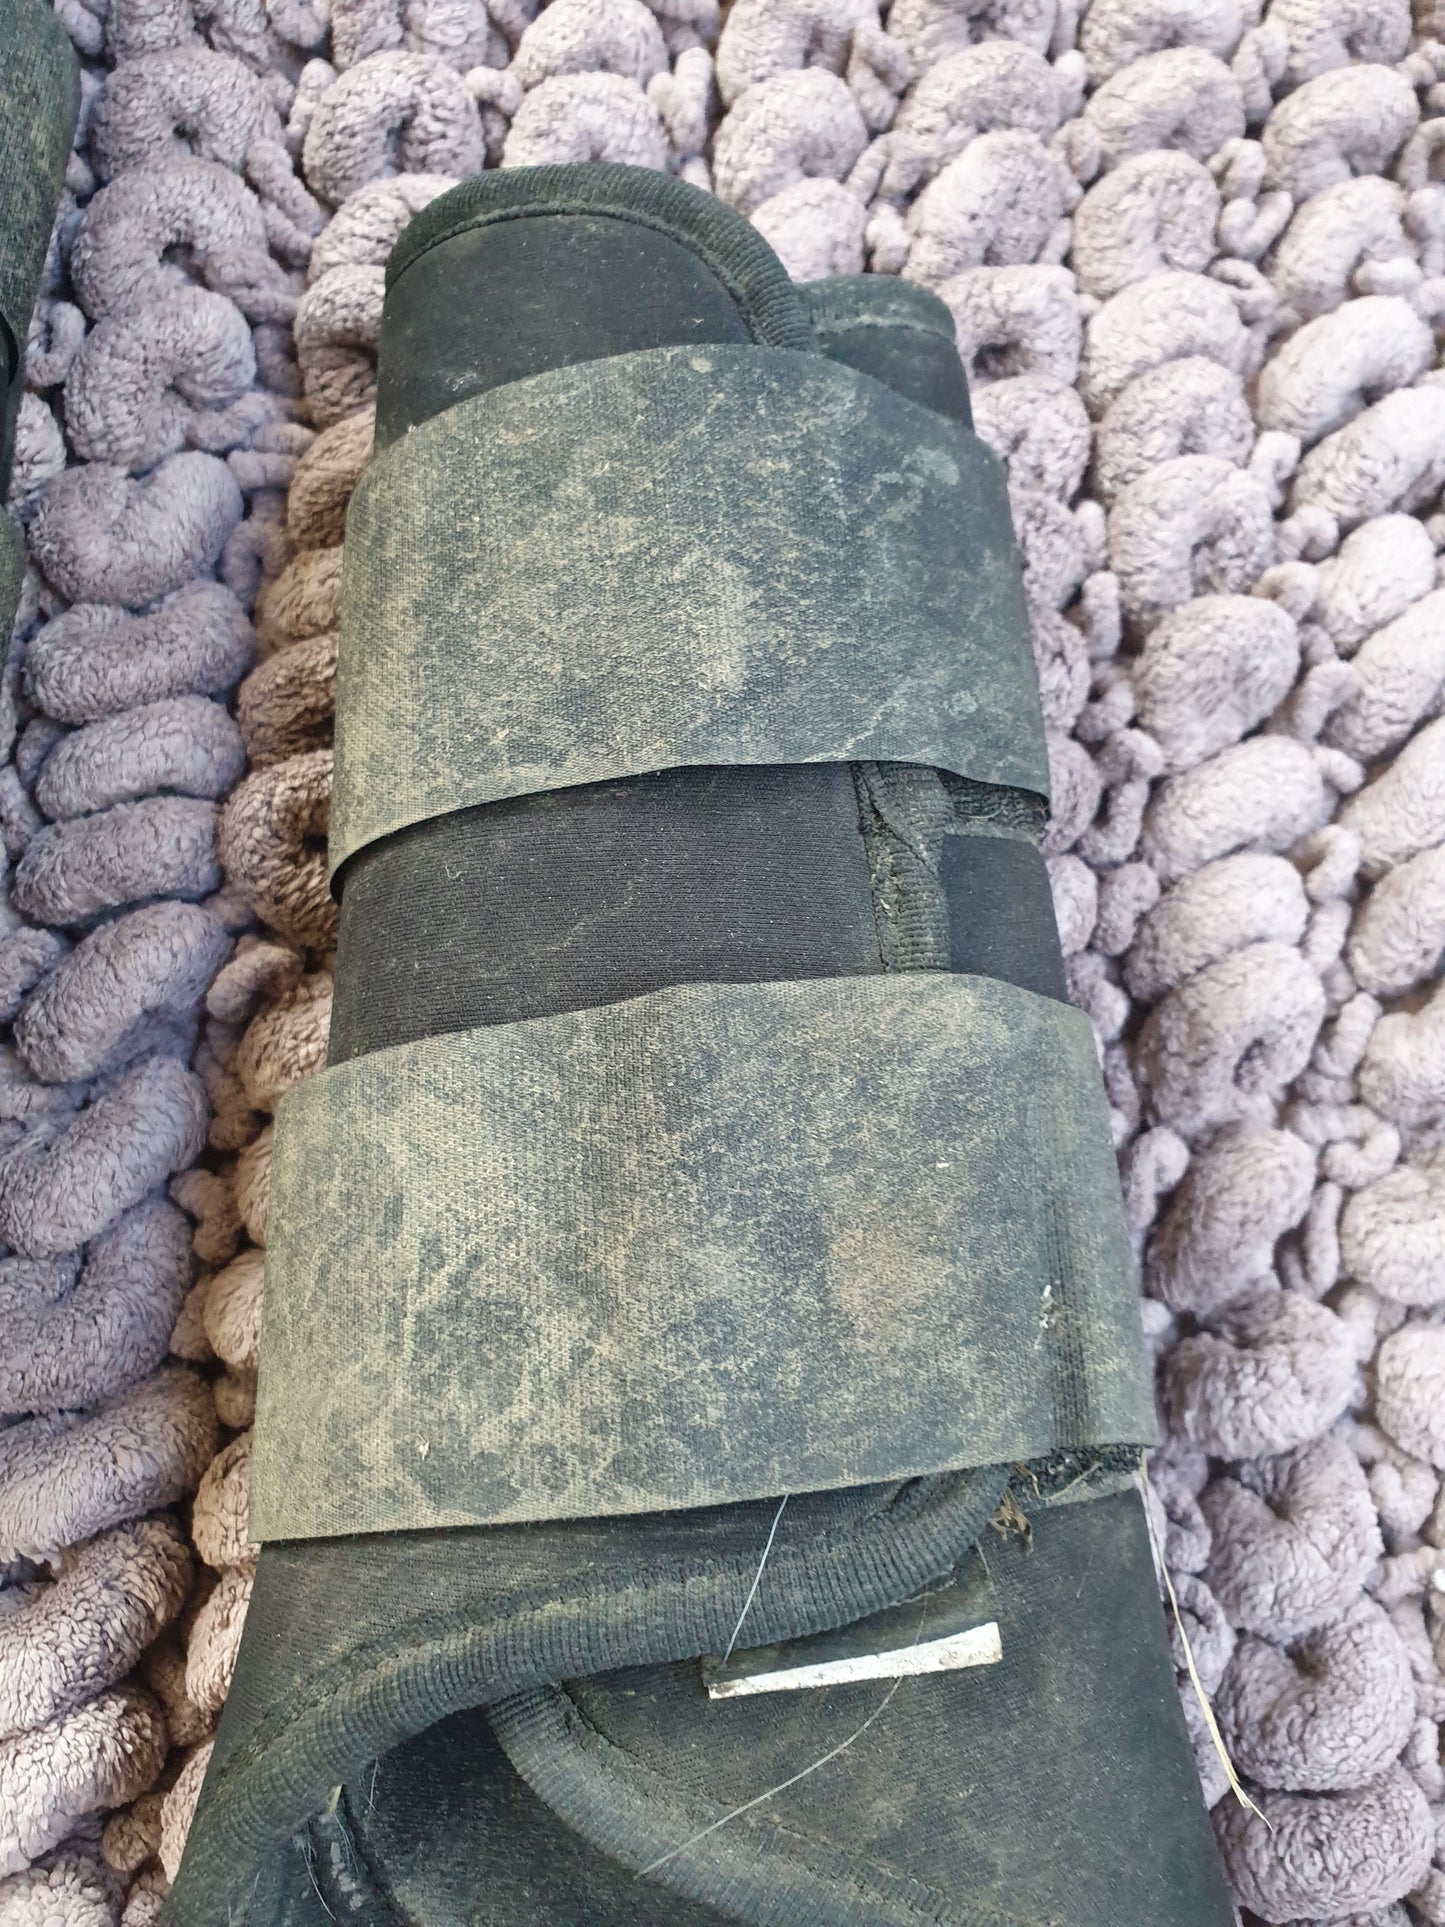 Used black cob size Requisite  brushing boots FREE POSTAGE☆